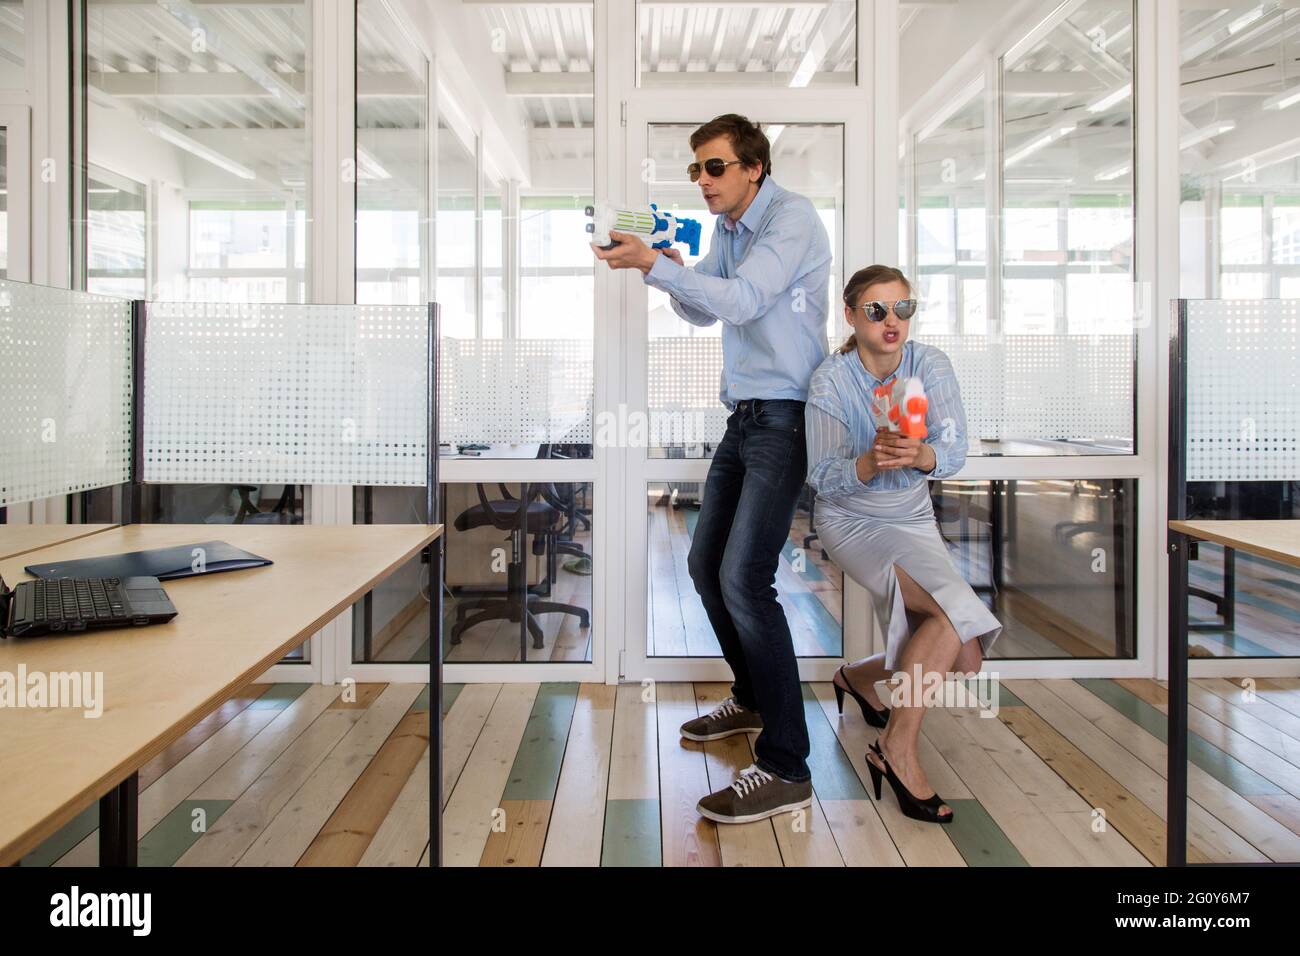 Man and woman in formal outfits standing back to back and aiming toy guns while having fun in office Stock Photo